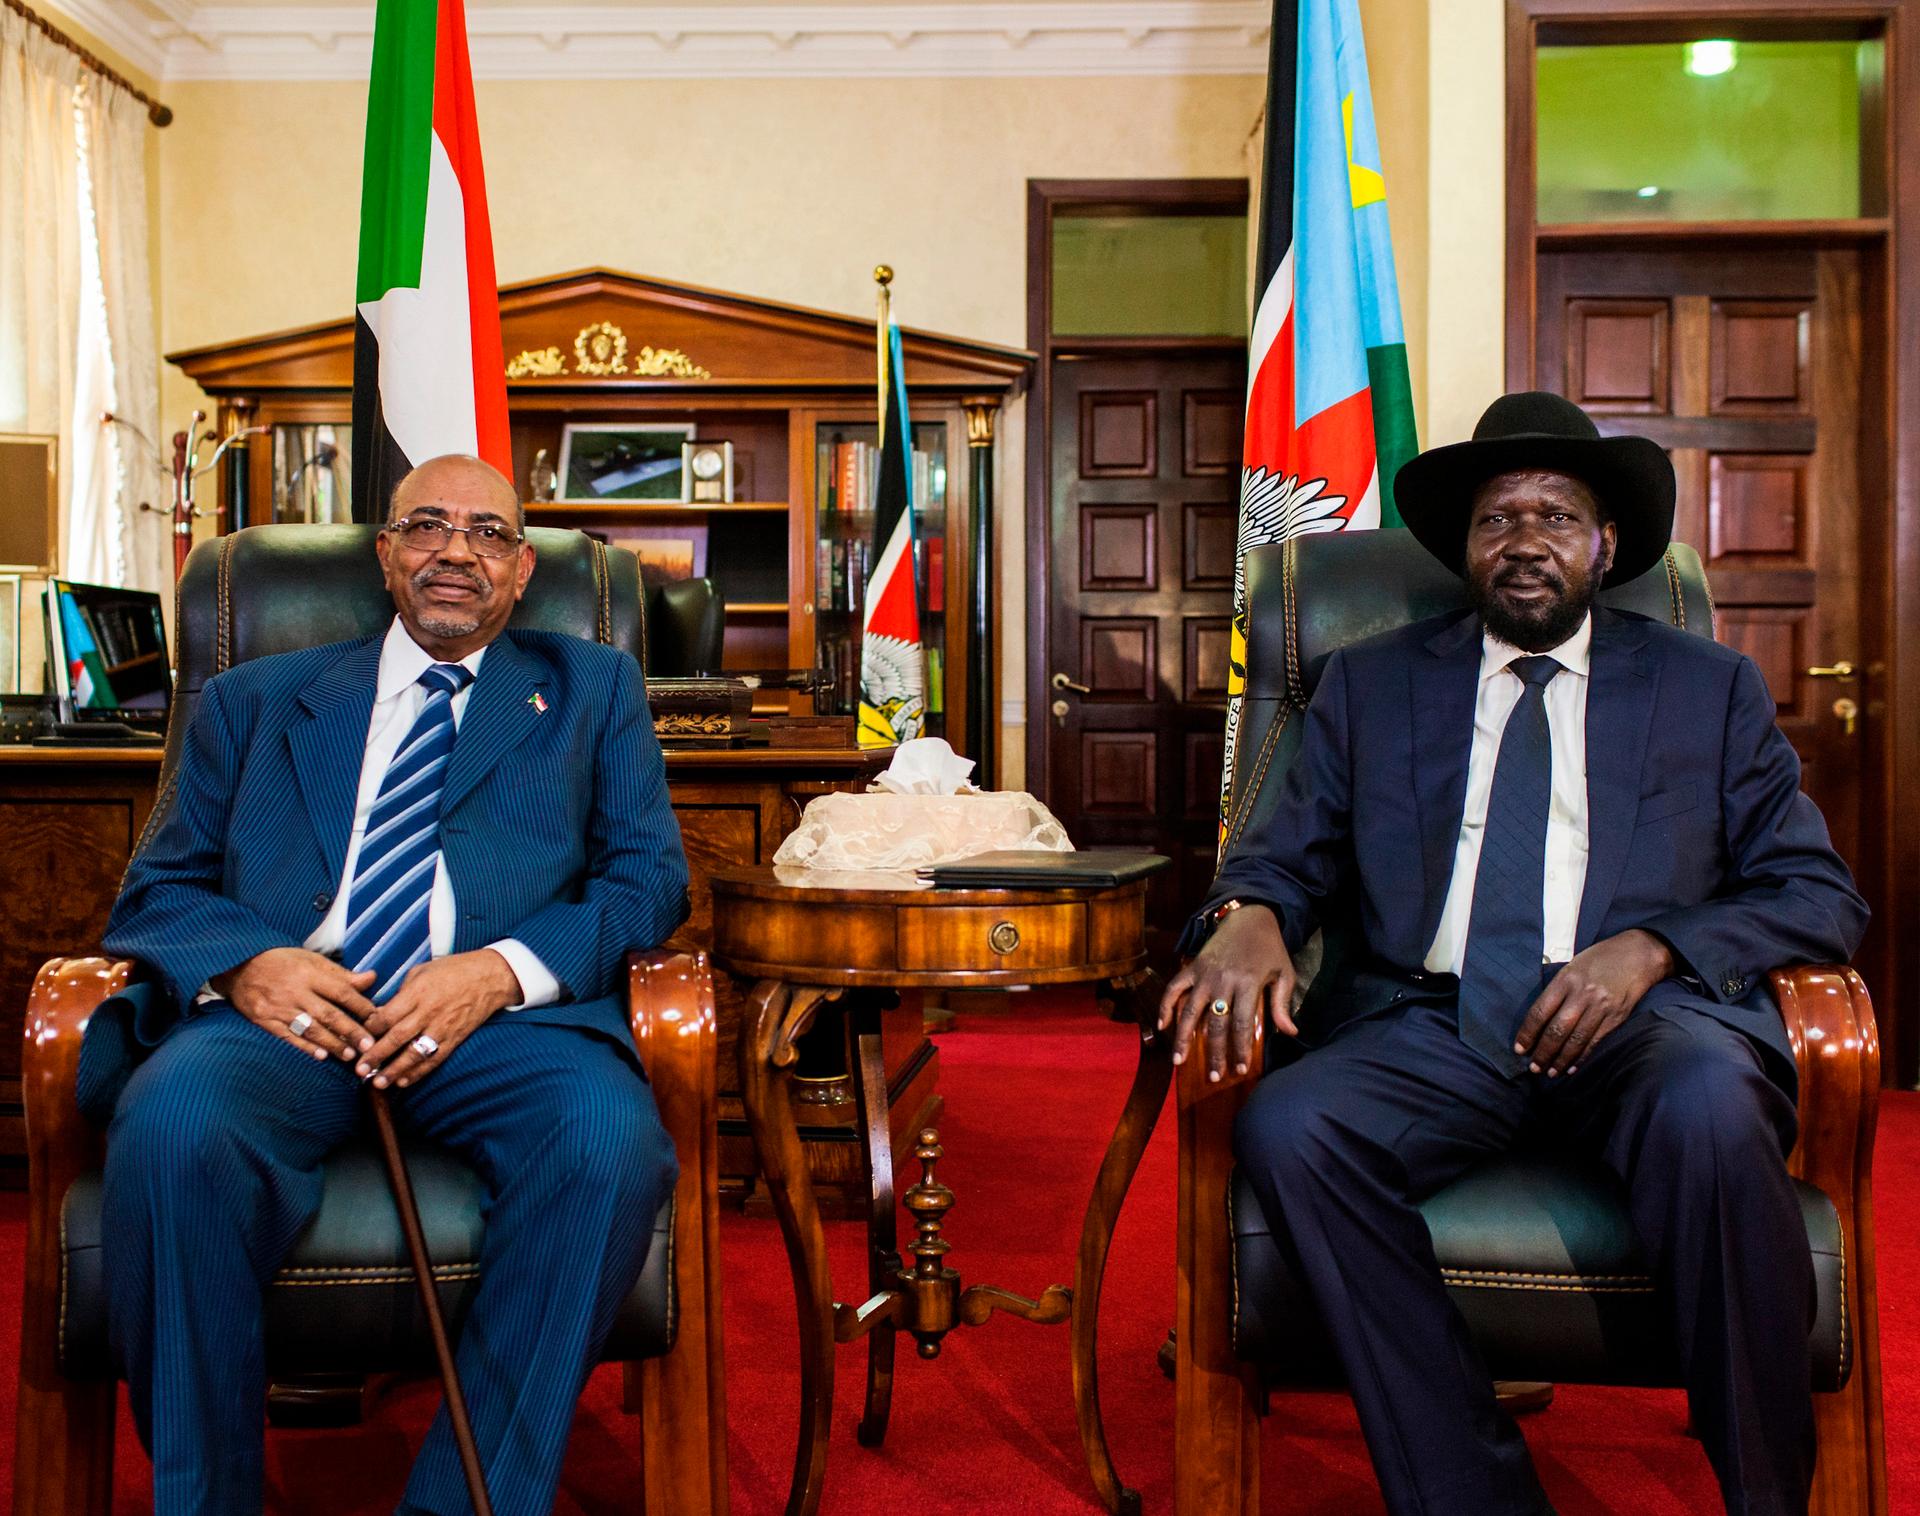 Sudan's President Omar al-Bashir (L) poses for a photograph with his host, South Sudan's President Salva Kiir, at the latter's office in Juba, South Sudan.